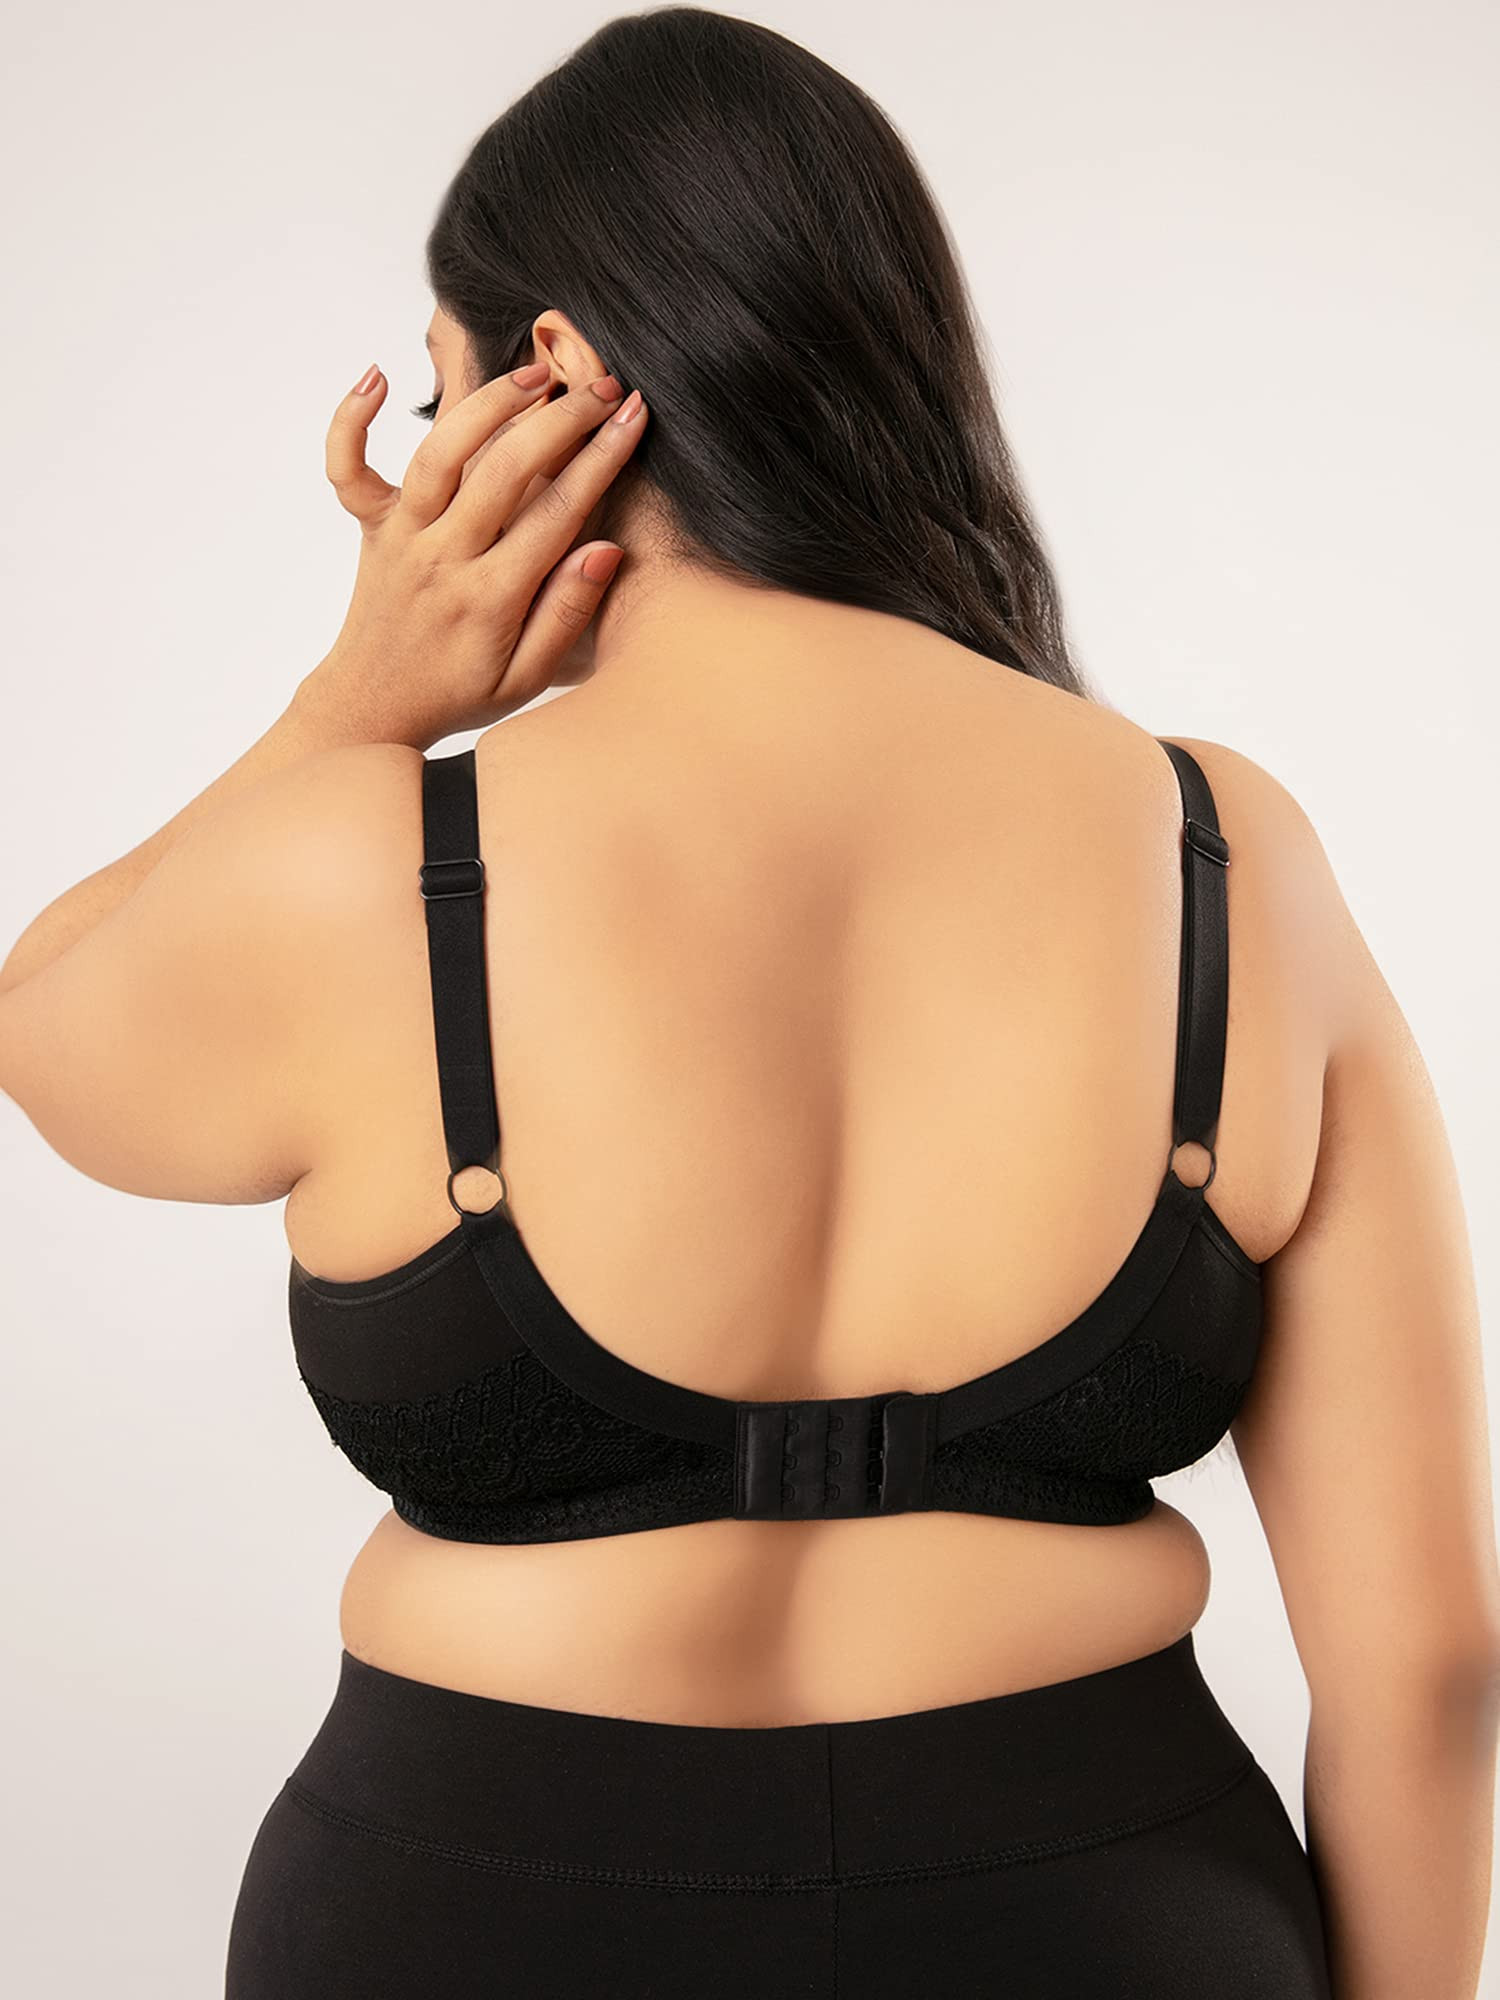 https://www.fastemi.com/uploads/fastemicom/products/nykd-by-nykaa-womens-full-support-m-frame-heavy-bust-everyday-cotton-bra--non-padded--wireless--full-coverage-bra-nyb101-black-36d-1nsize-36d-240381484393202_l.jpg